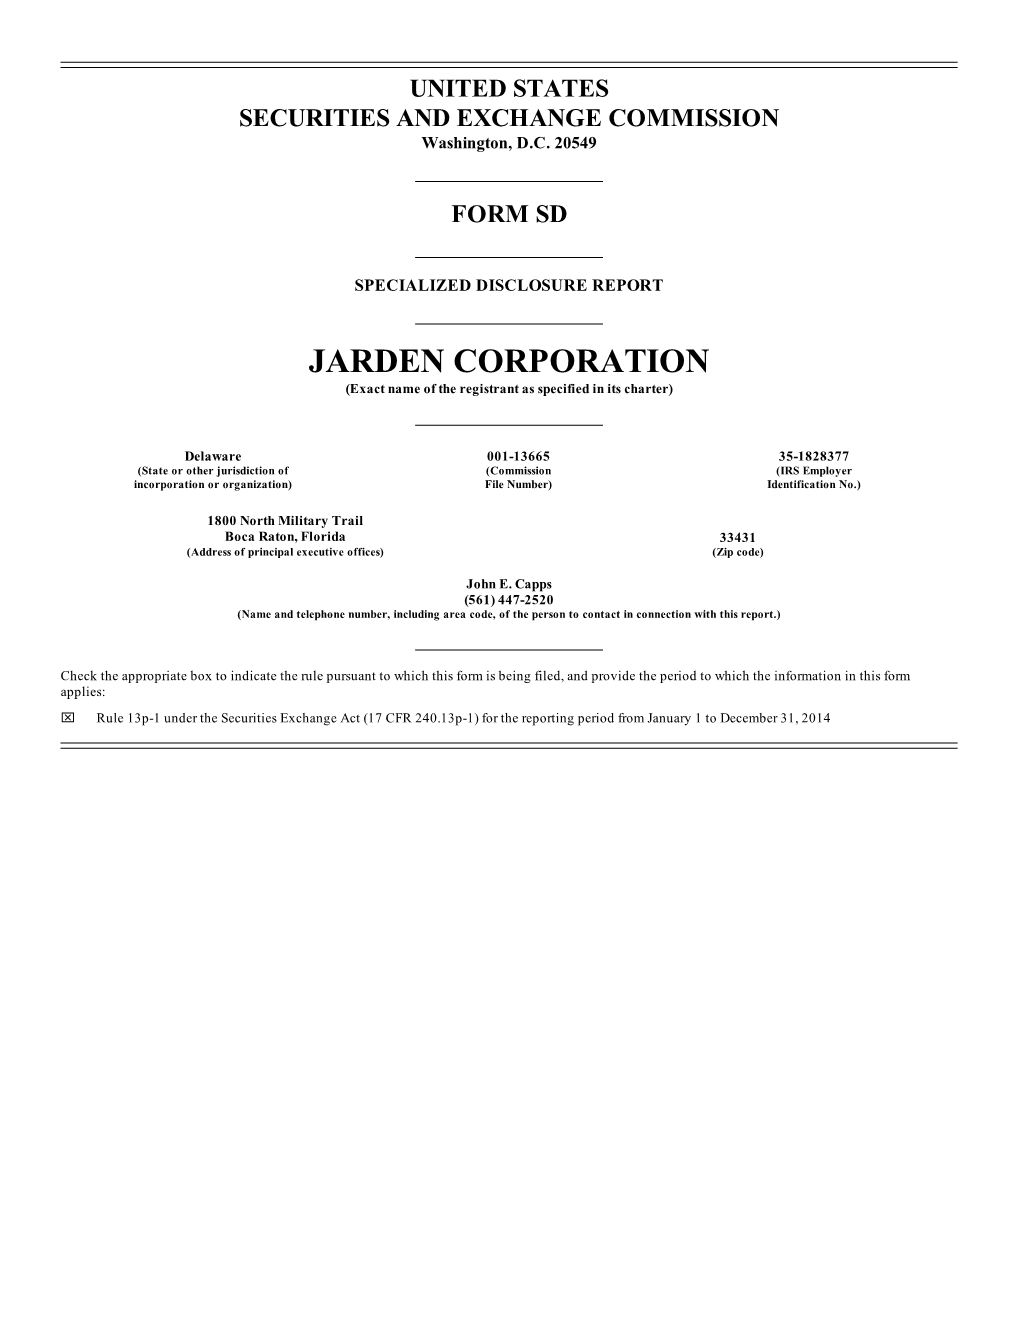 JARDEN CORPORATION (Exact Name of the Registrant As Specified in Its Charter)